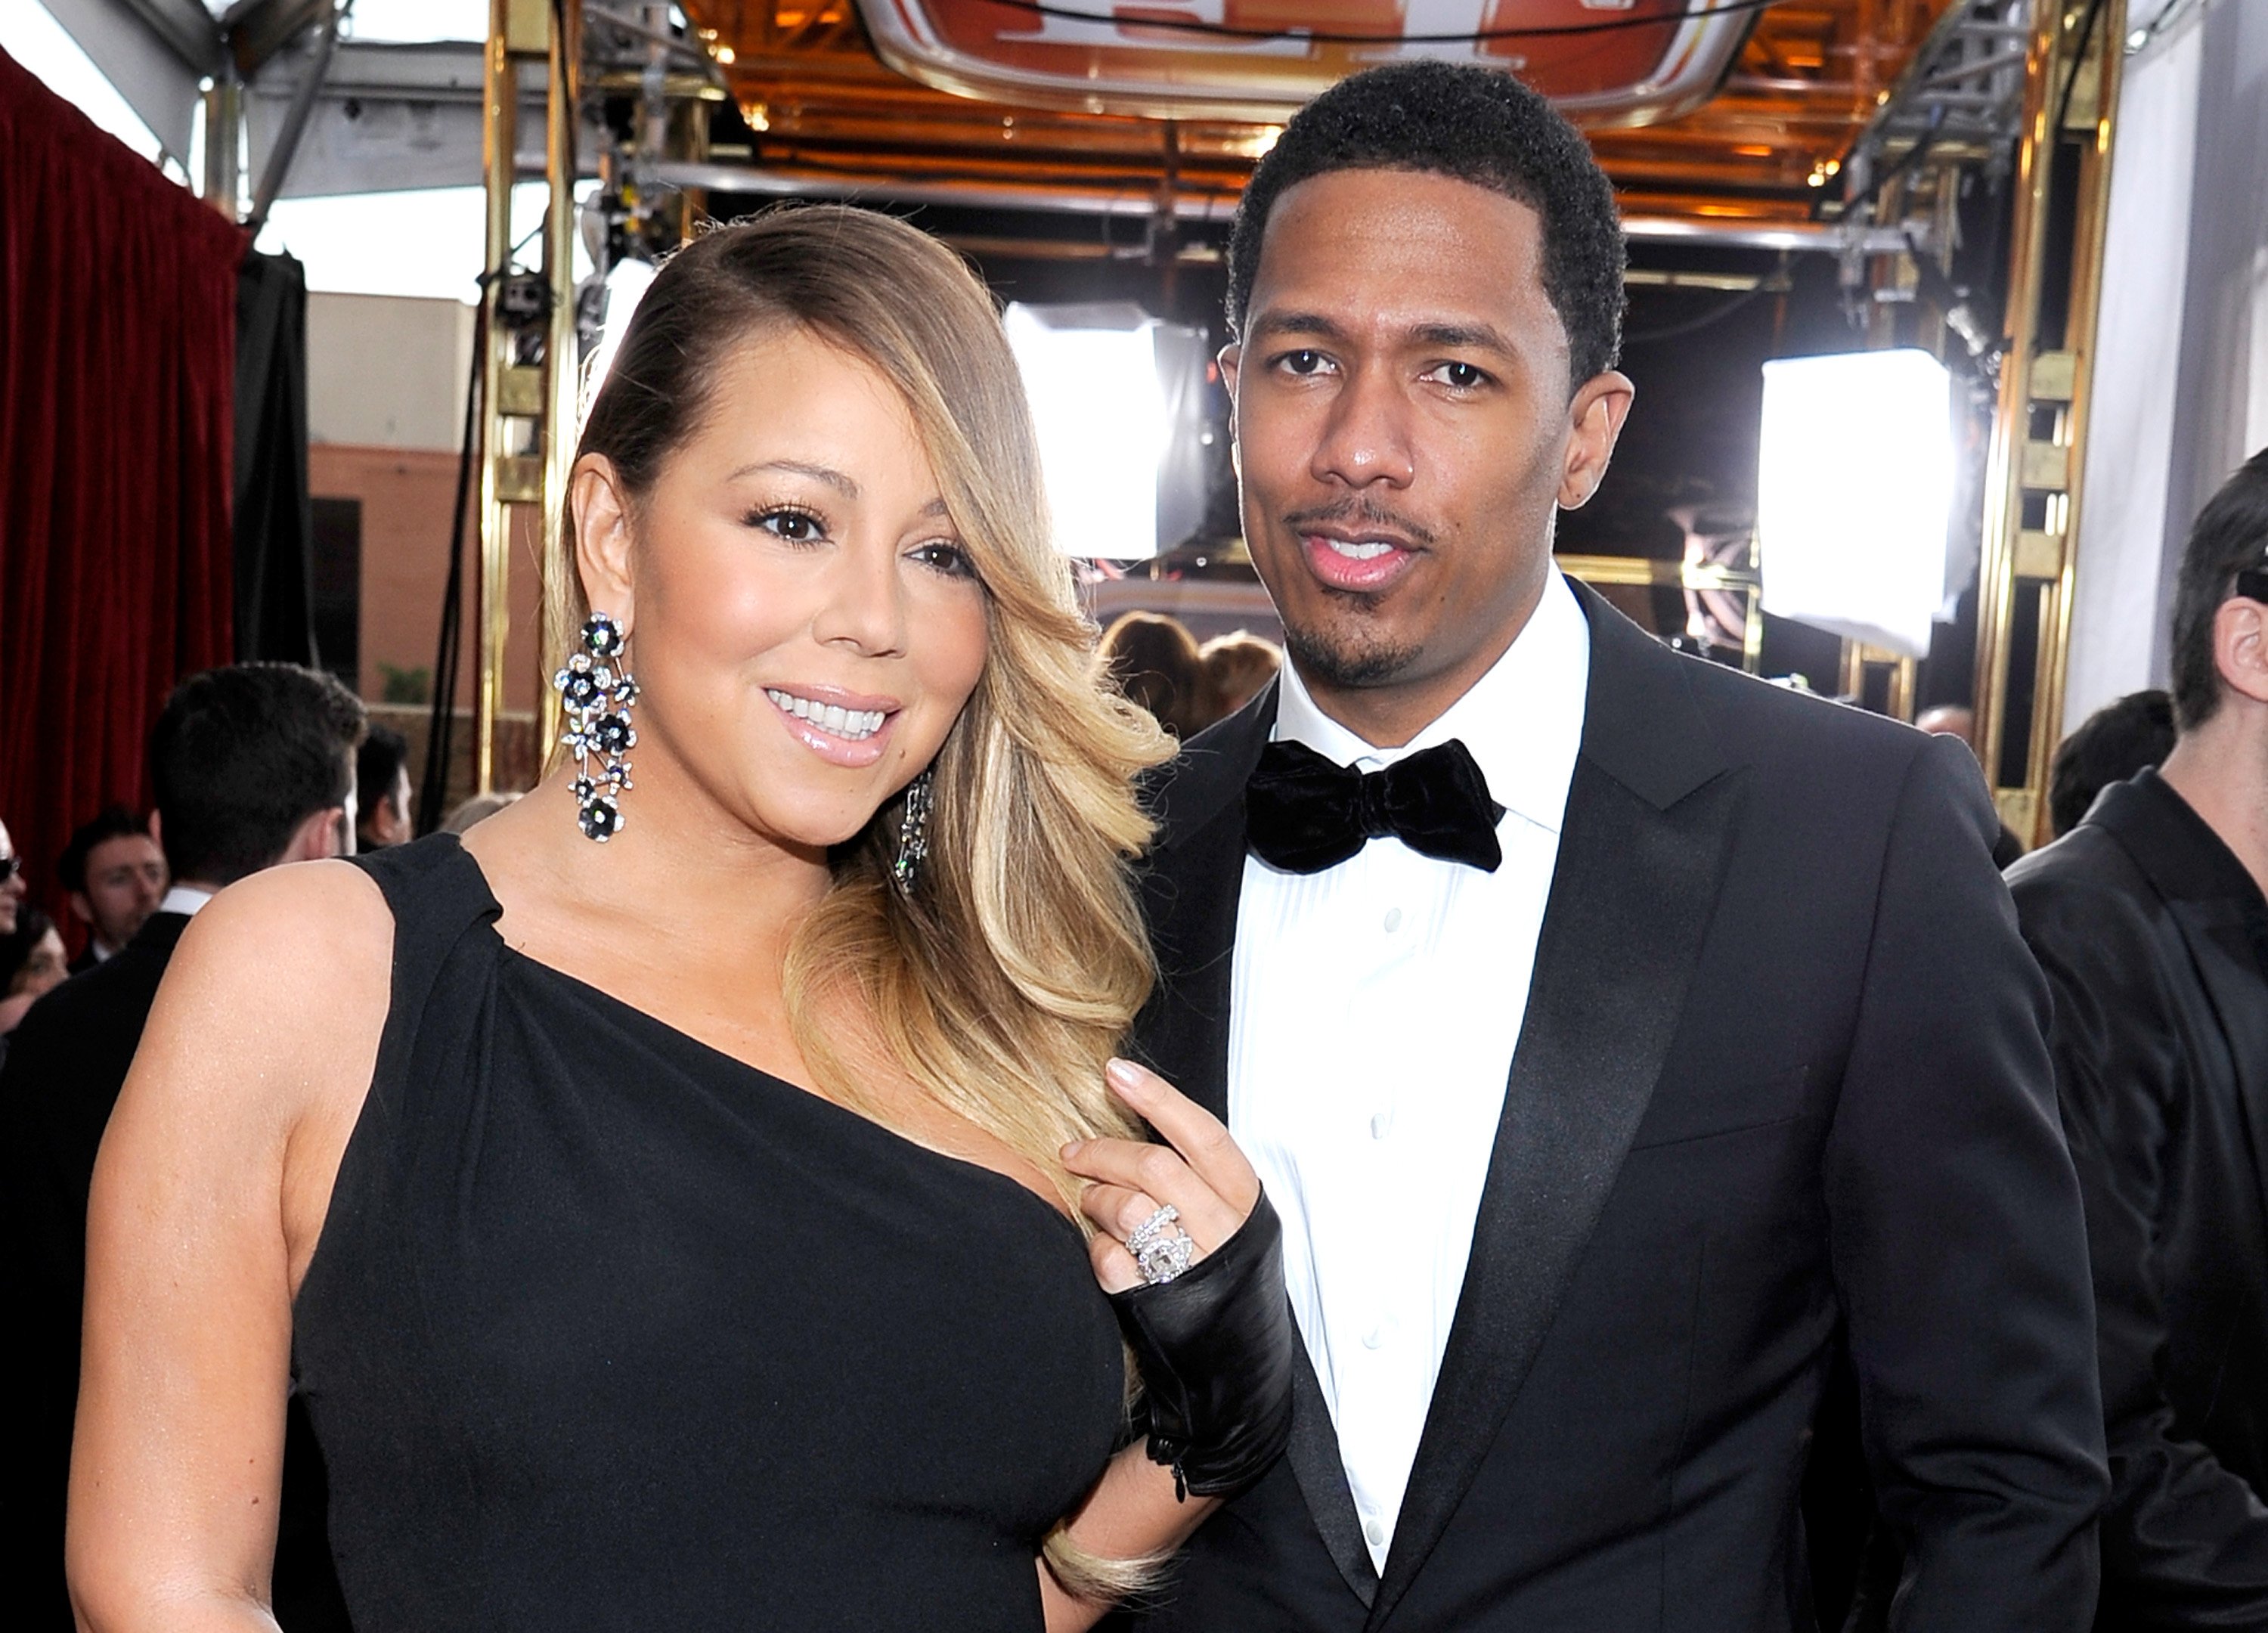 Mariah Carey and Nick Cannon at the 20th Annual Screen Actors Guild Awards in January 2014. | Photo: Getty Images